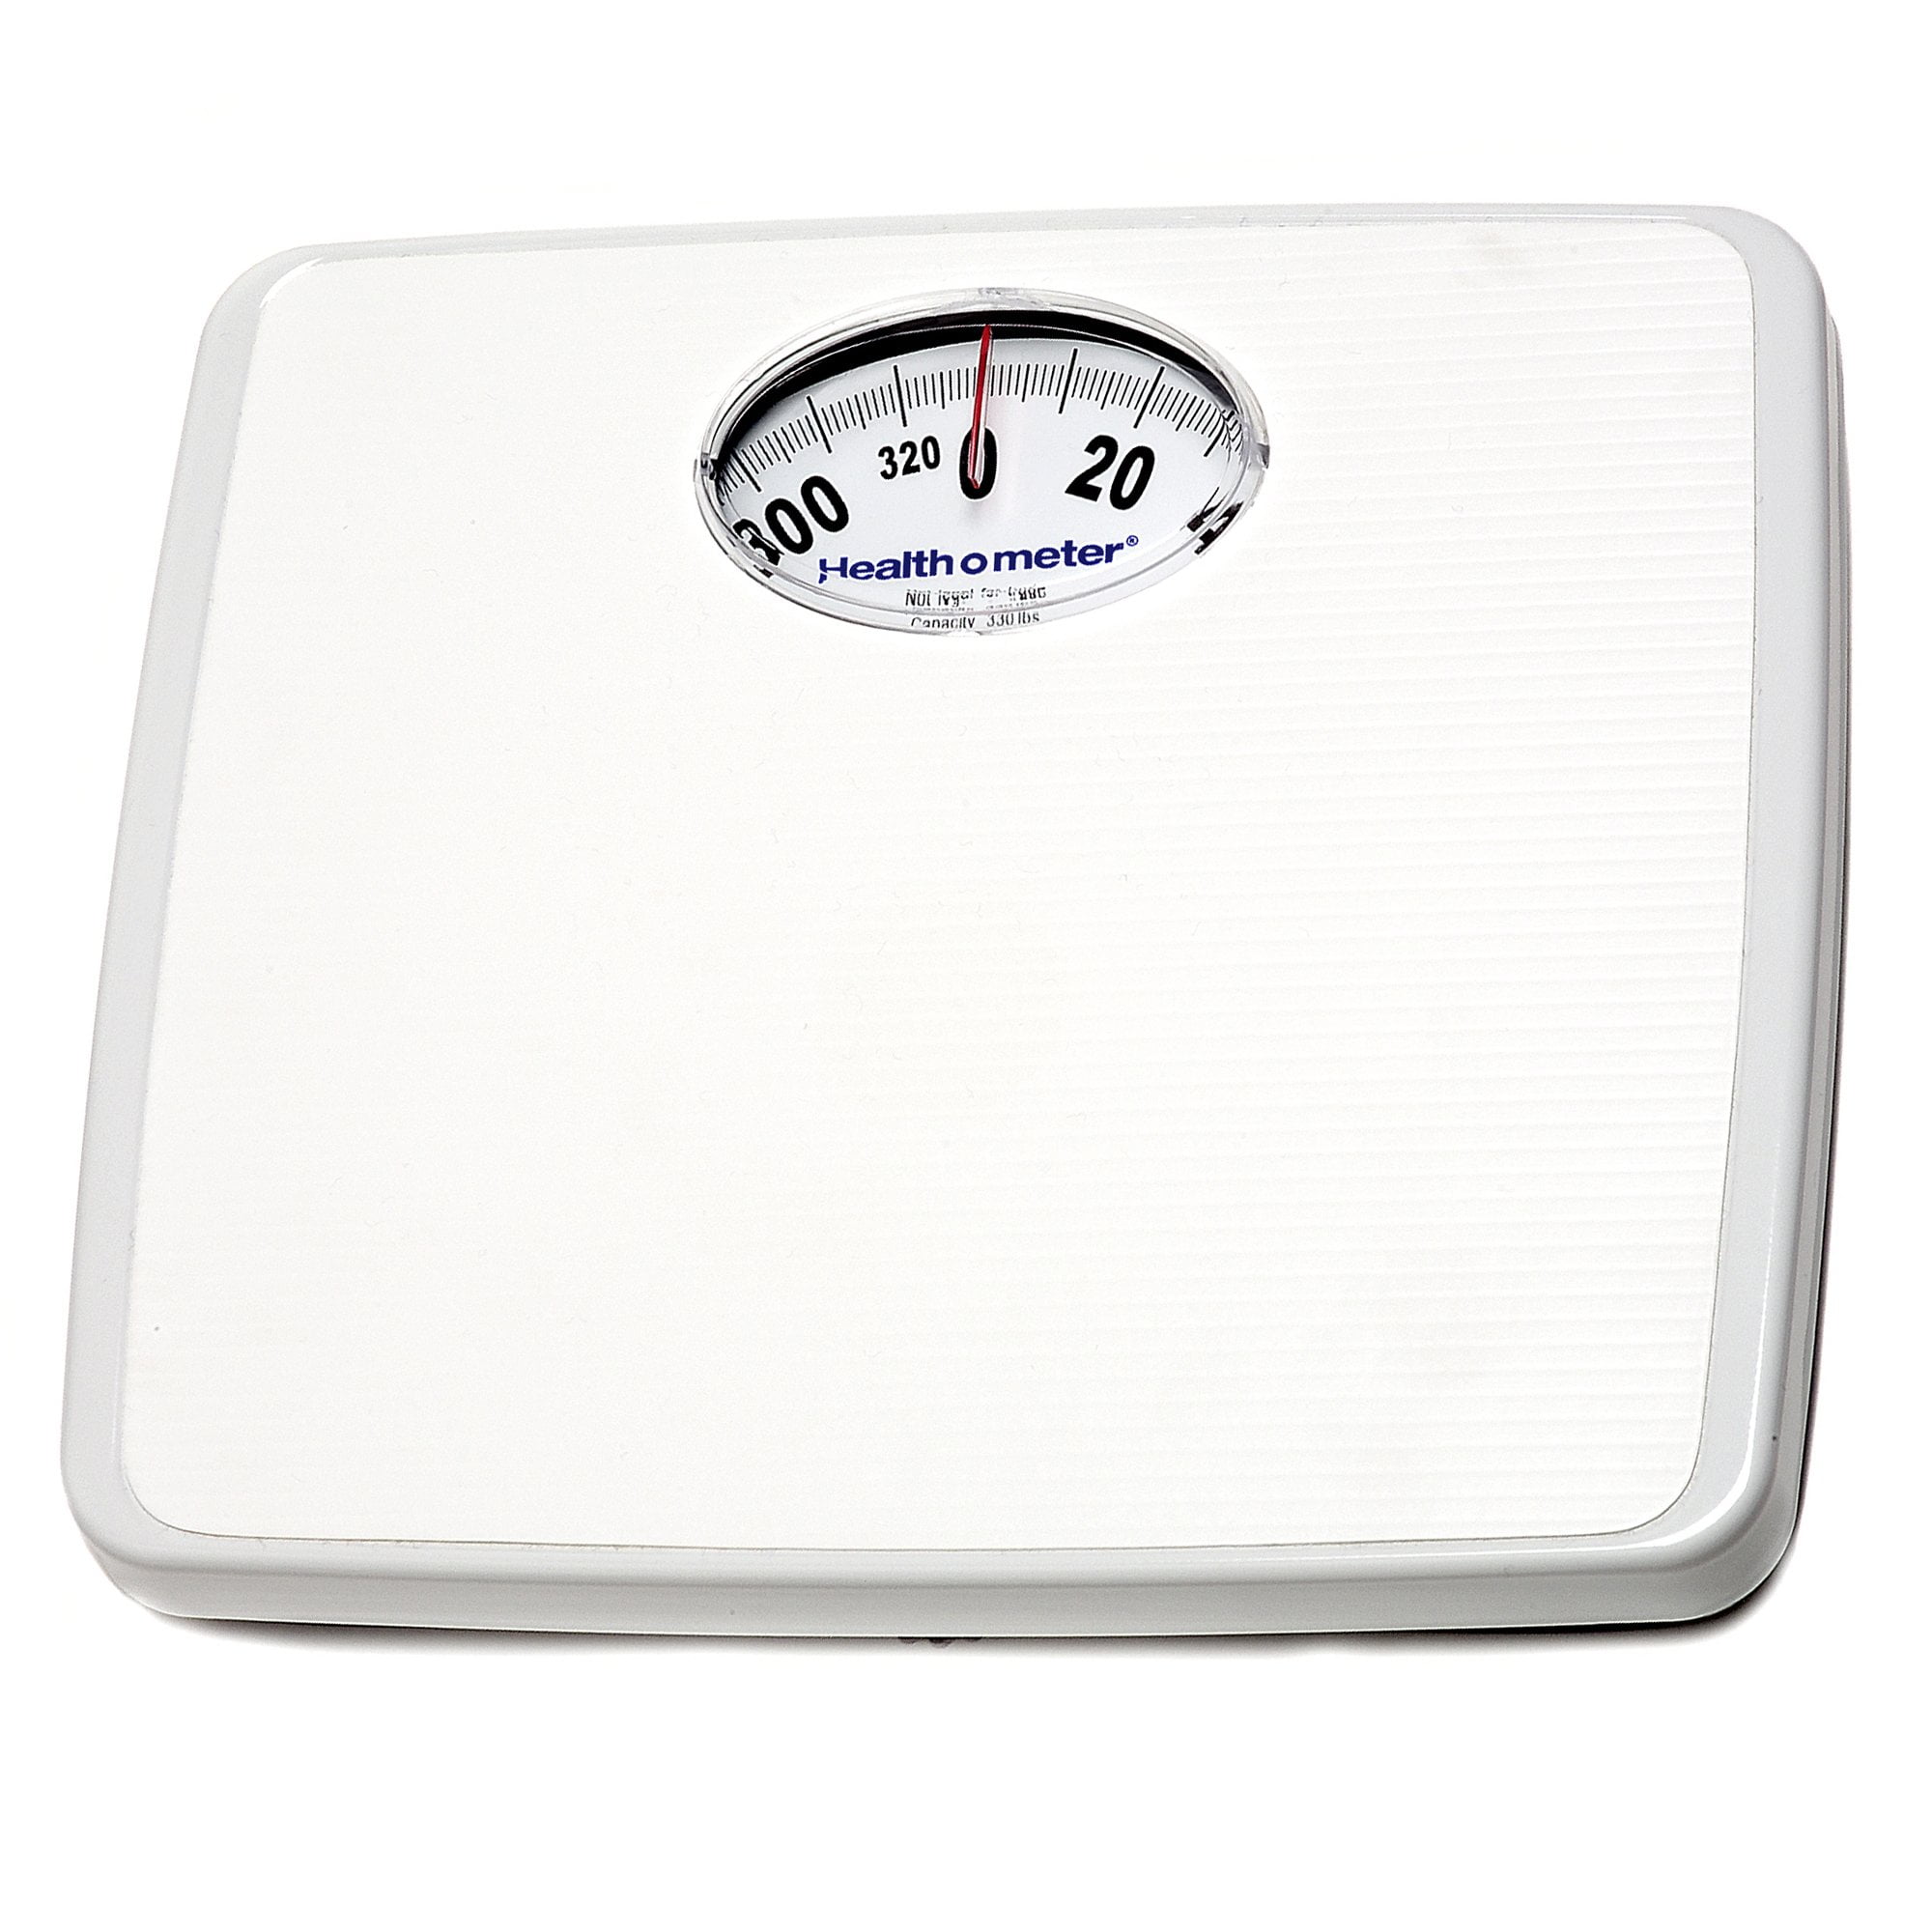 Health O Meter Bathroom Scale Full View Large Oversize Dial 330LB